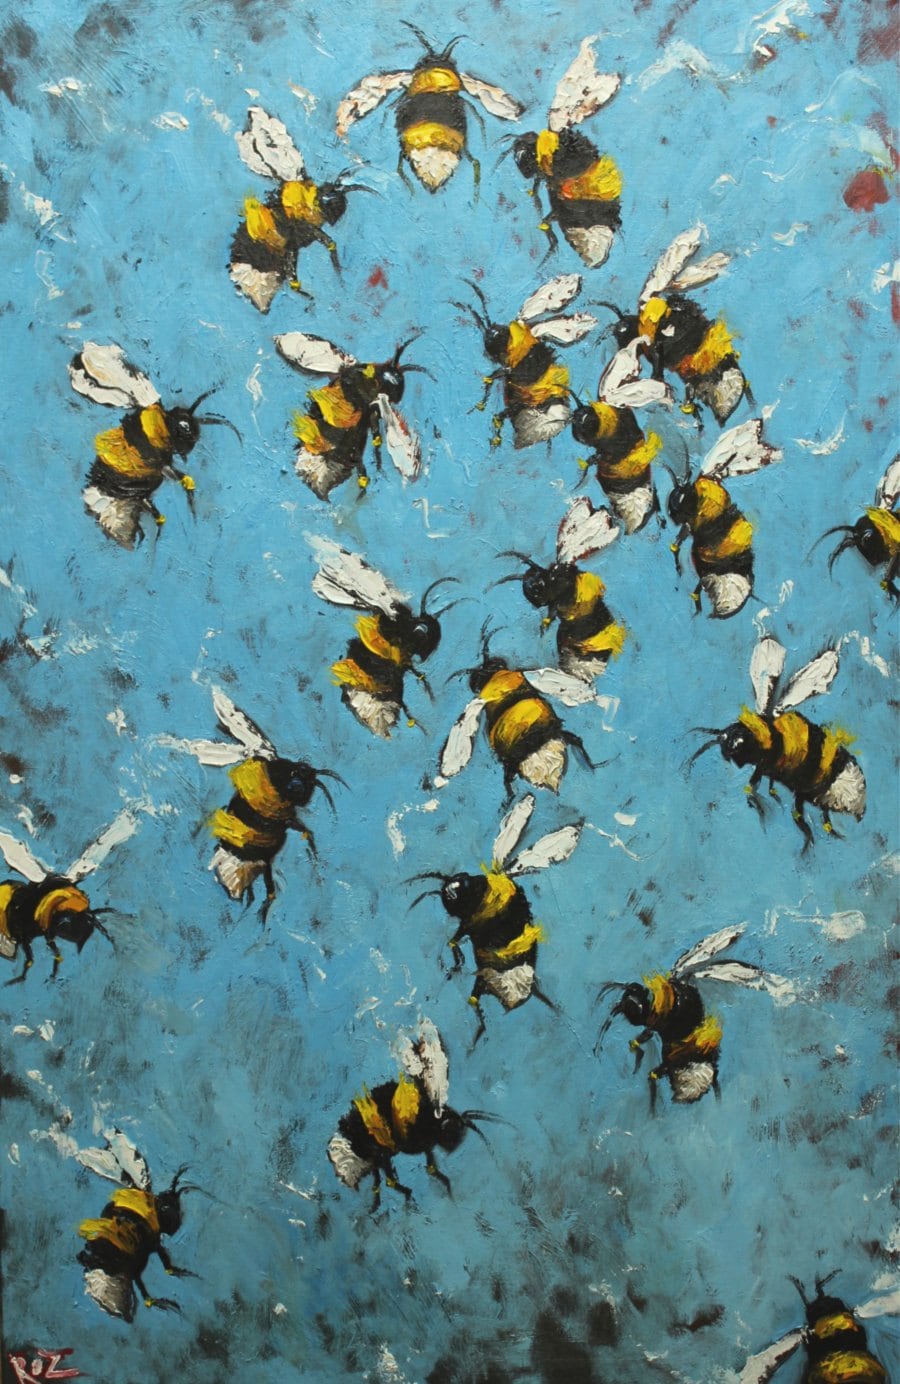 Bee painting 206 24x36 inch original oil painting by Roz